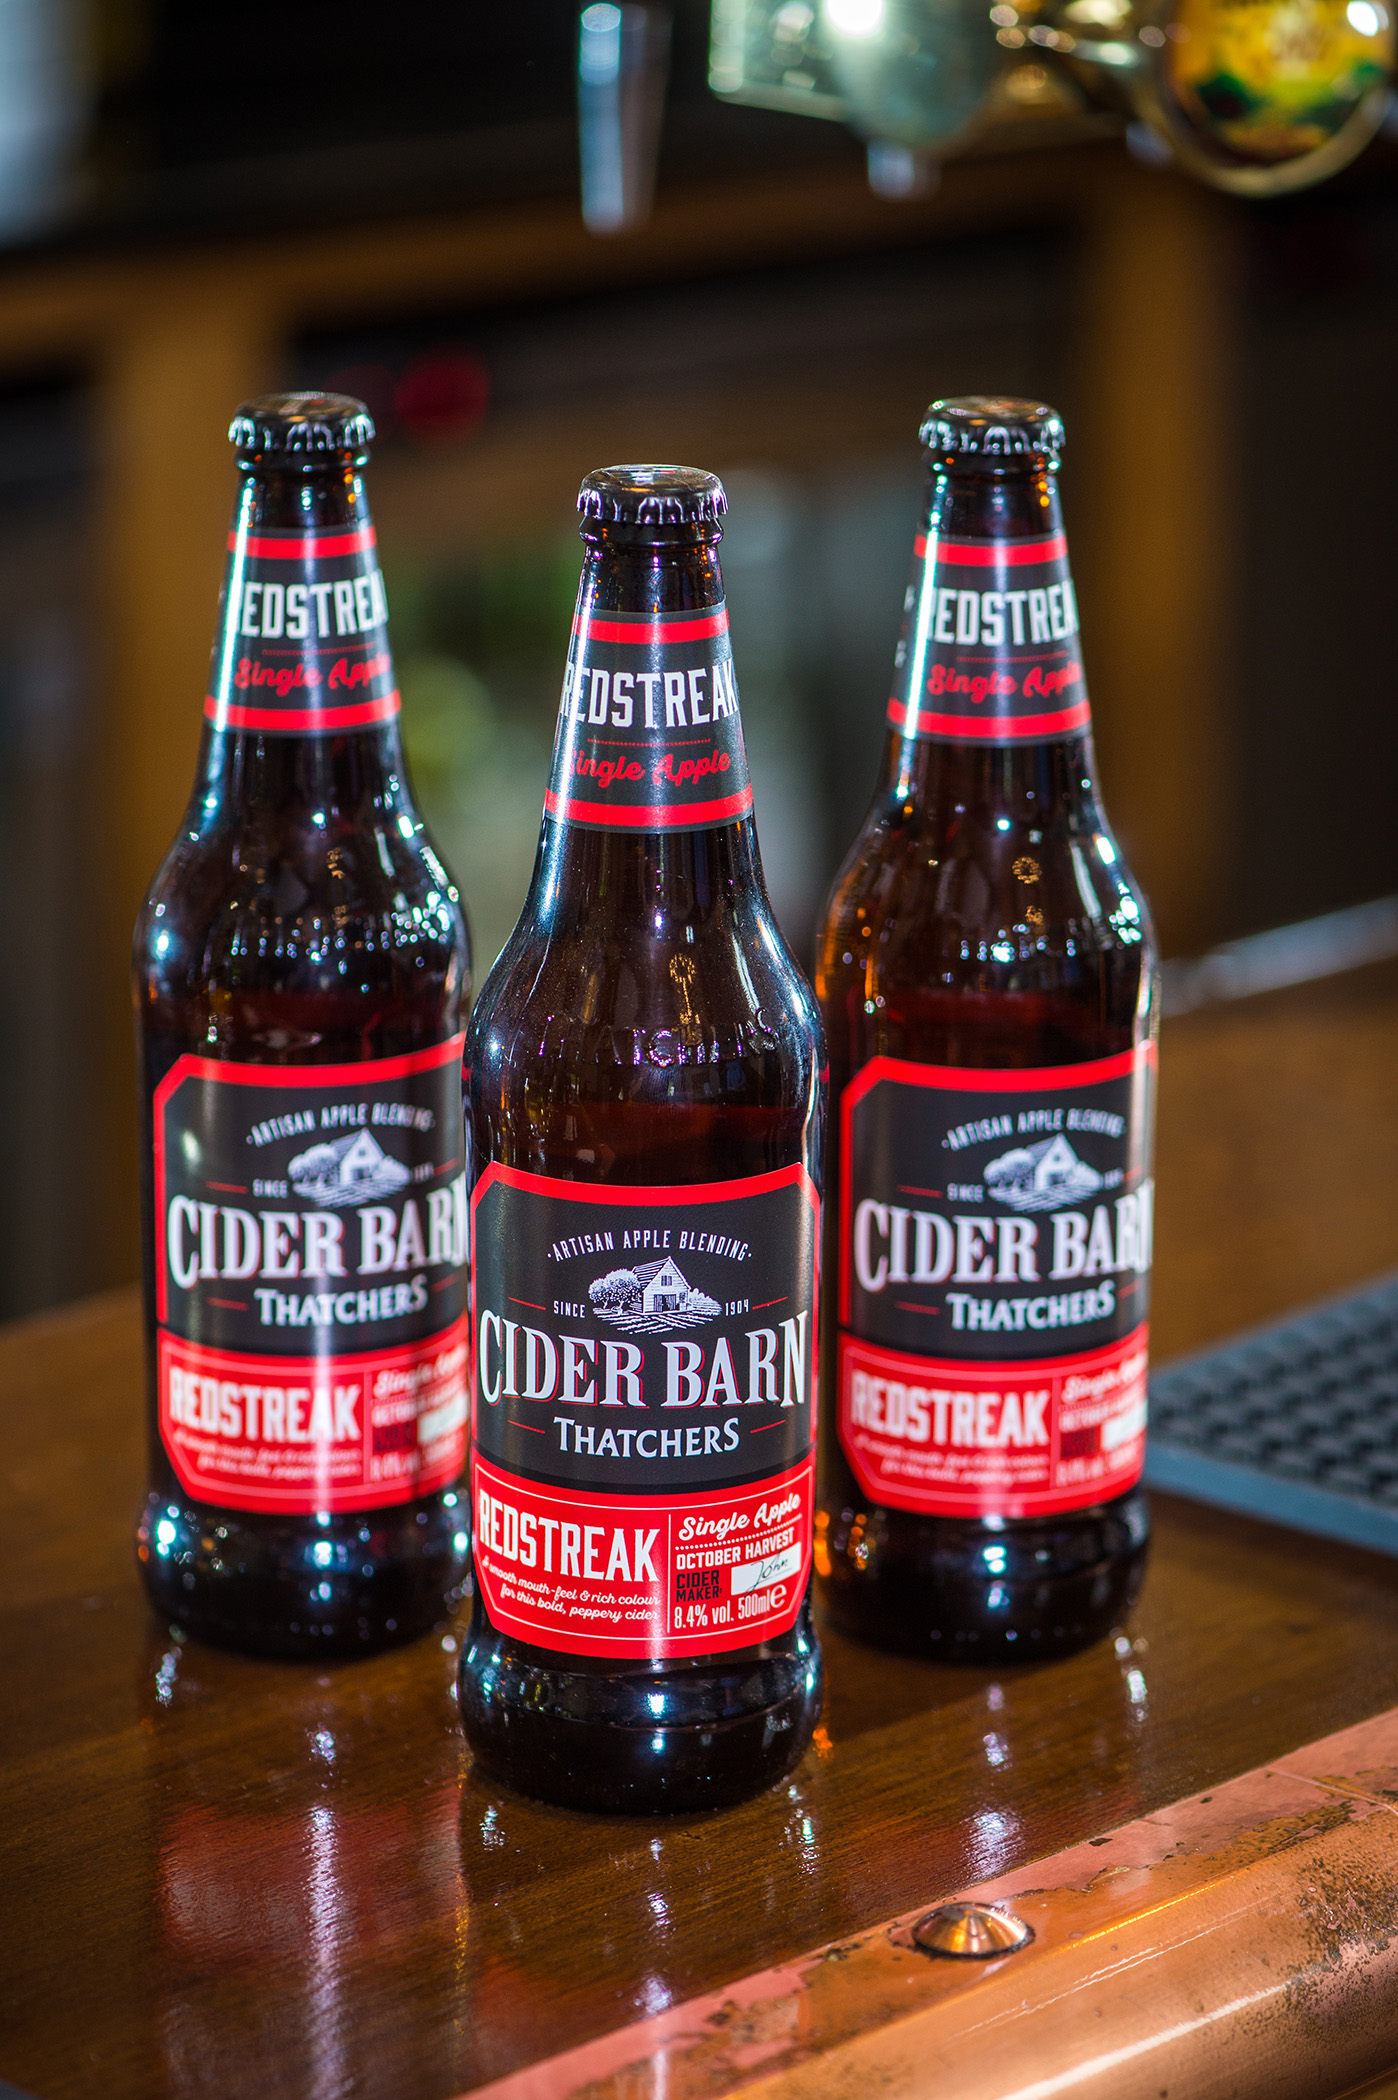 Thatchers Cider’s Redstreak takes the industry’s highest accolade